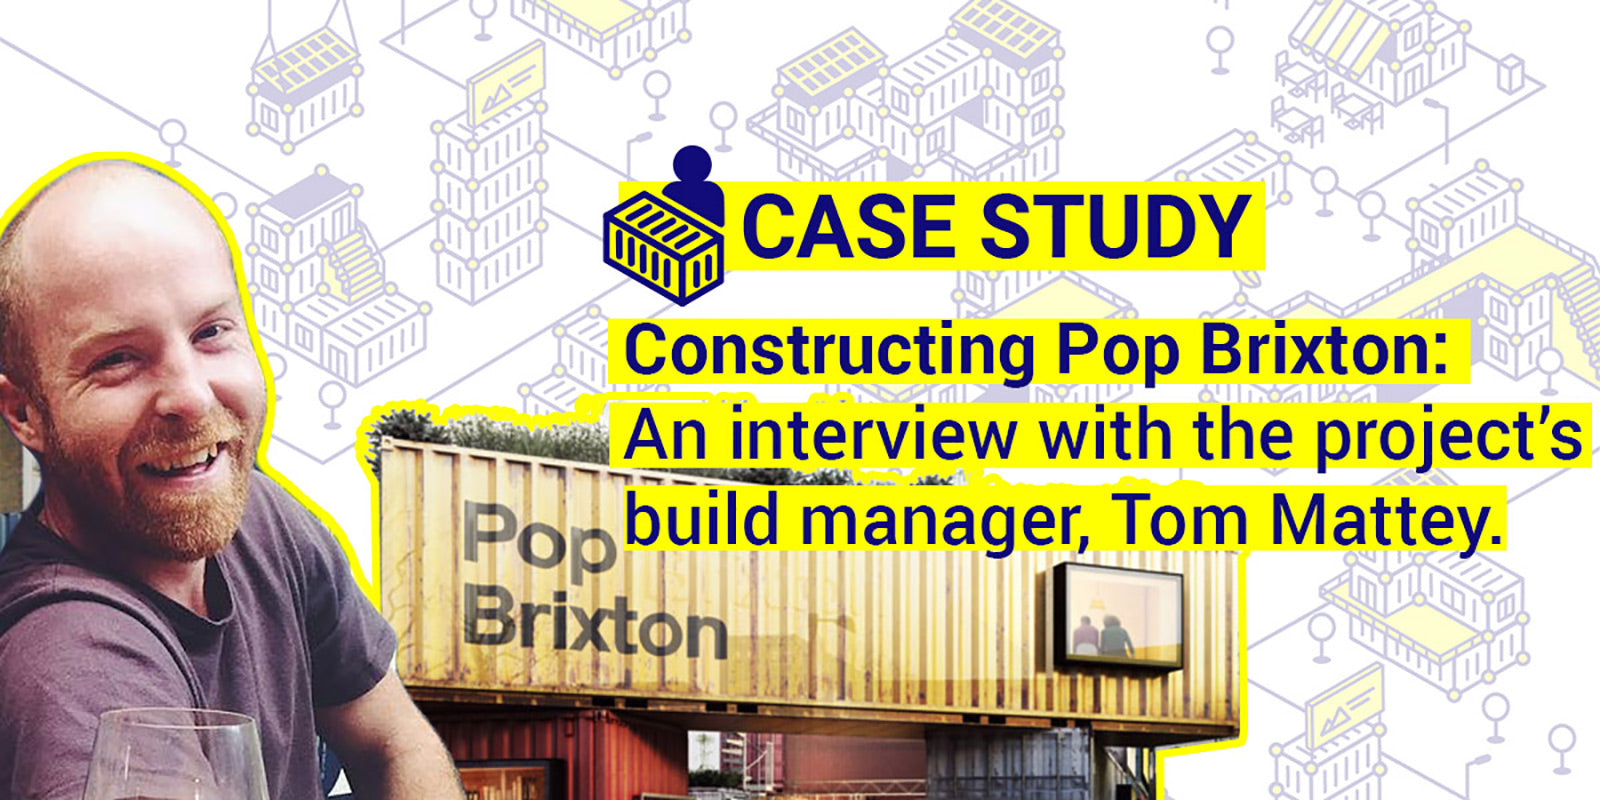 Constructing Pop Brixton: An interview with the project's build manager, Tom Mattey